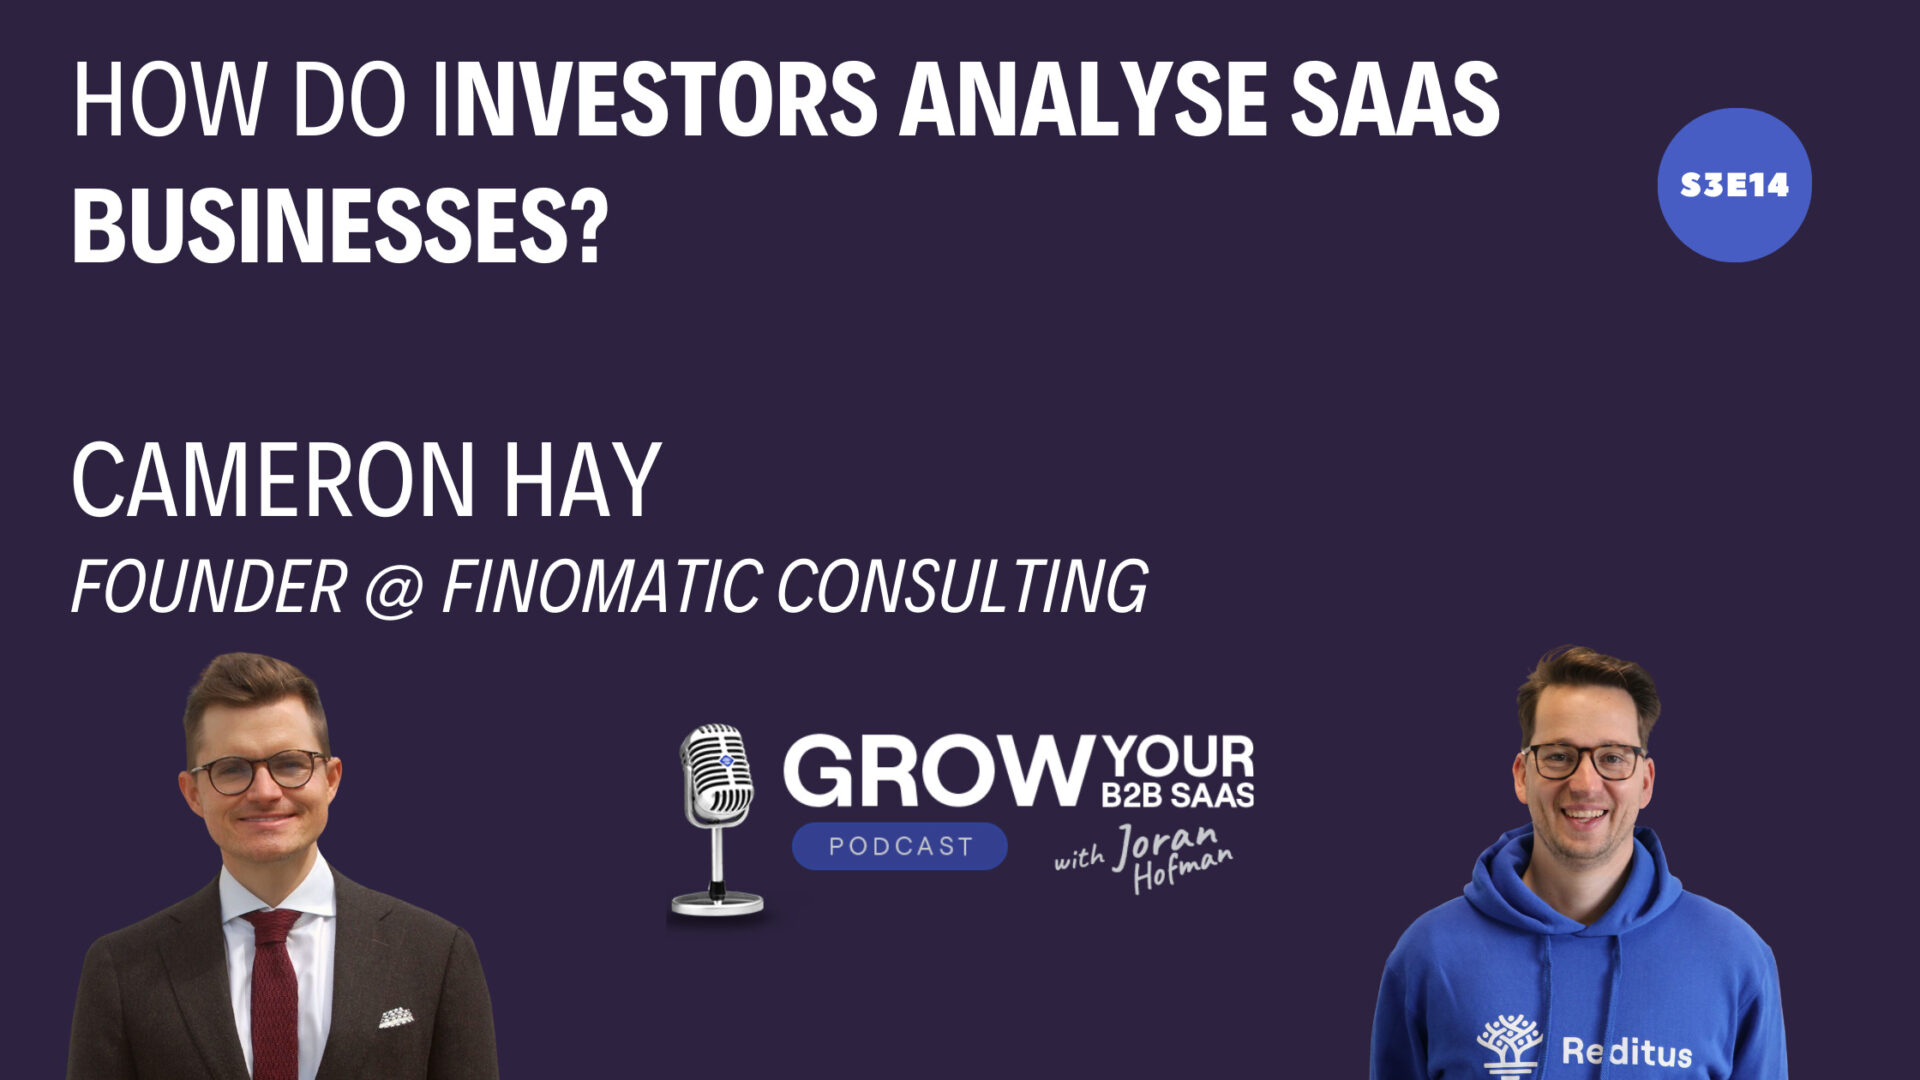 https://www.getreditus.com/podcast/s3e14-how-do-investors-analyse-saas-businesses-with-cameron-hay/